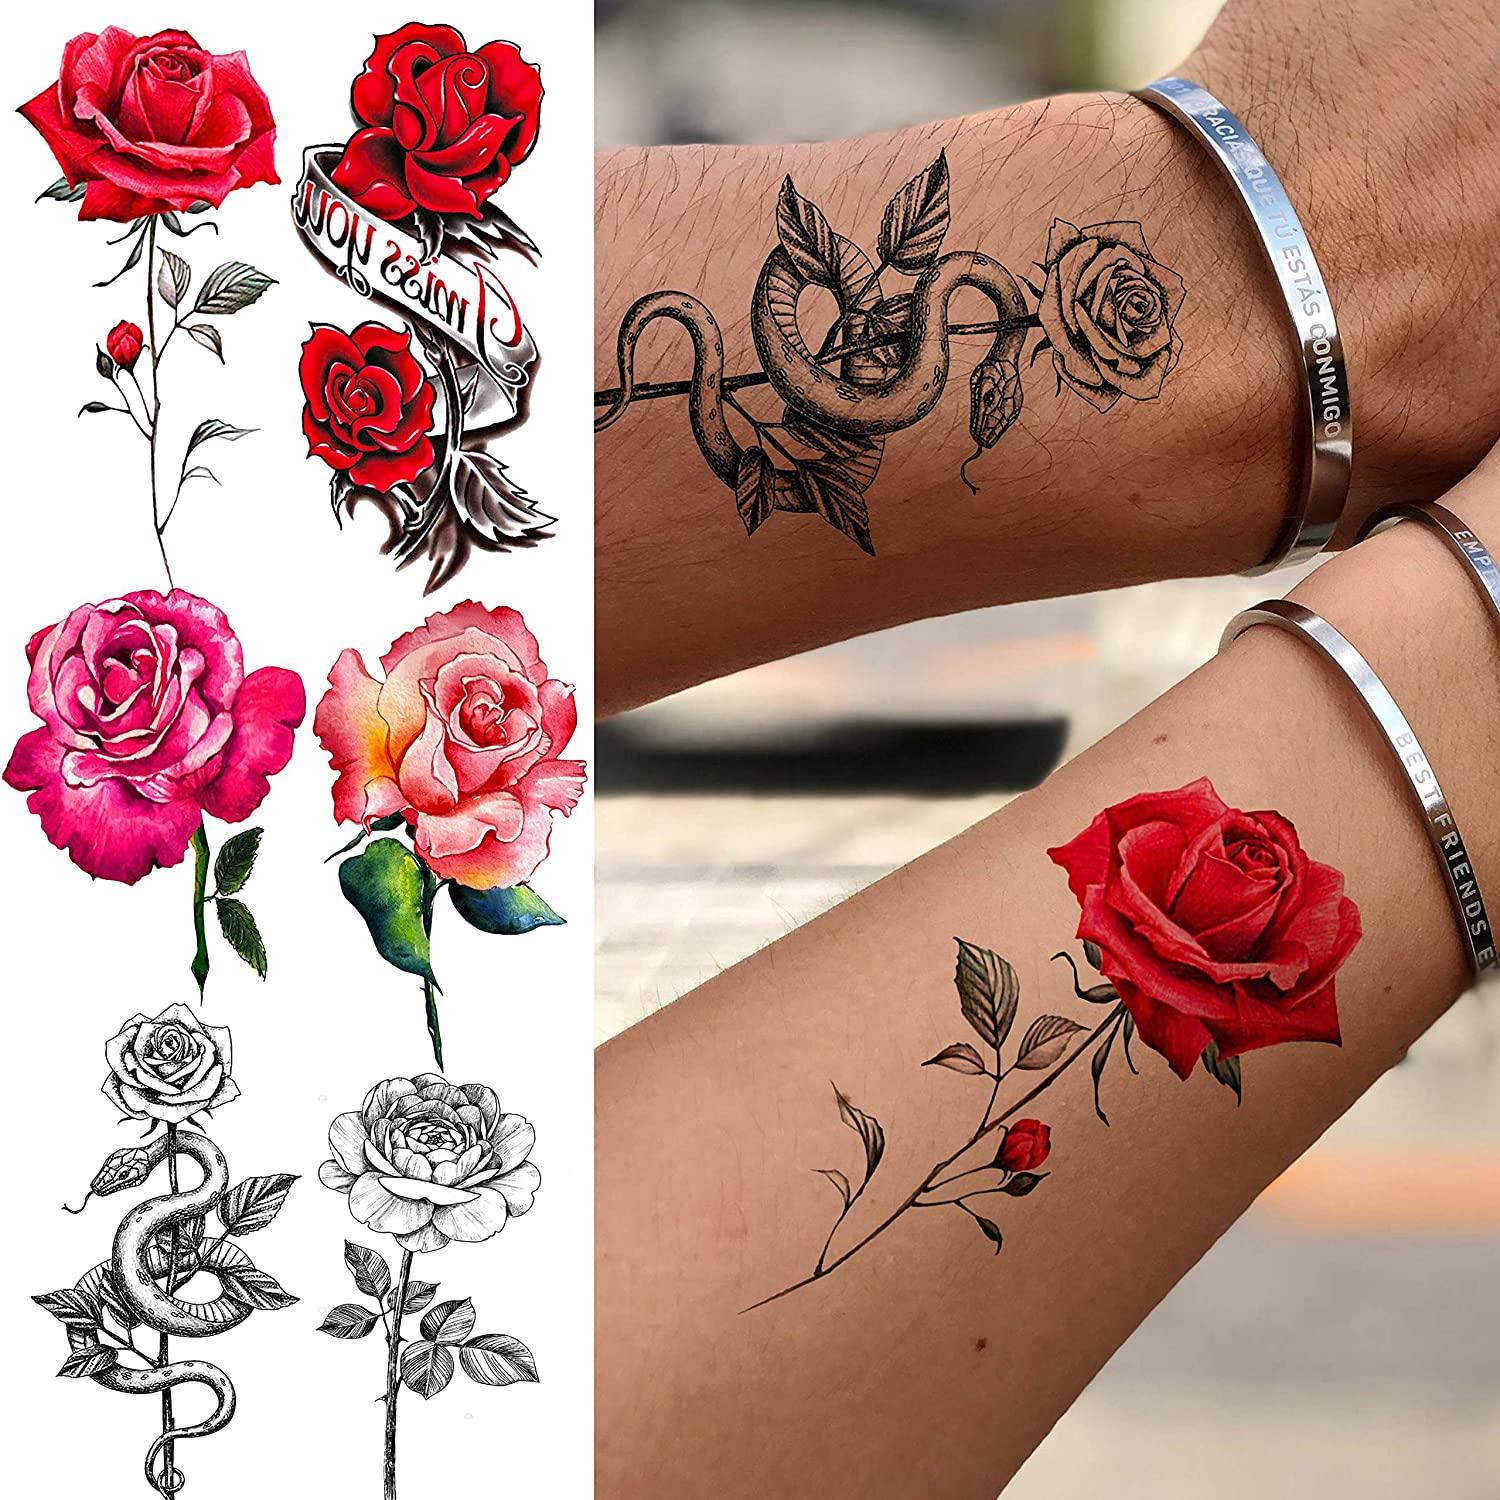 EGMBGM 24 Sheets Black Sketch Rose With Snake Temporary Tattoos For Women, Sexy Red Rose Branch Crescent Moon Tattoo Sticker For Girls, Waterproof Arm Leg Neck Fake Flowers Tattoo Temporary Tatoo Kit